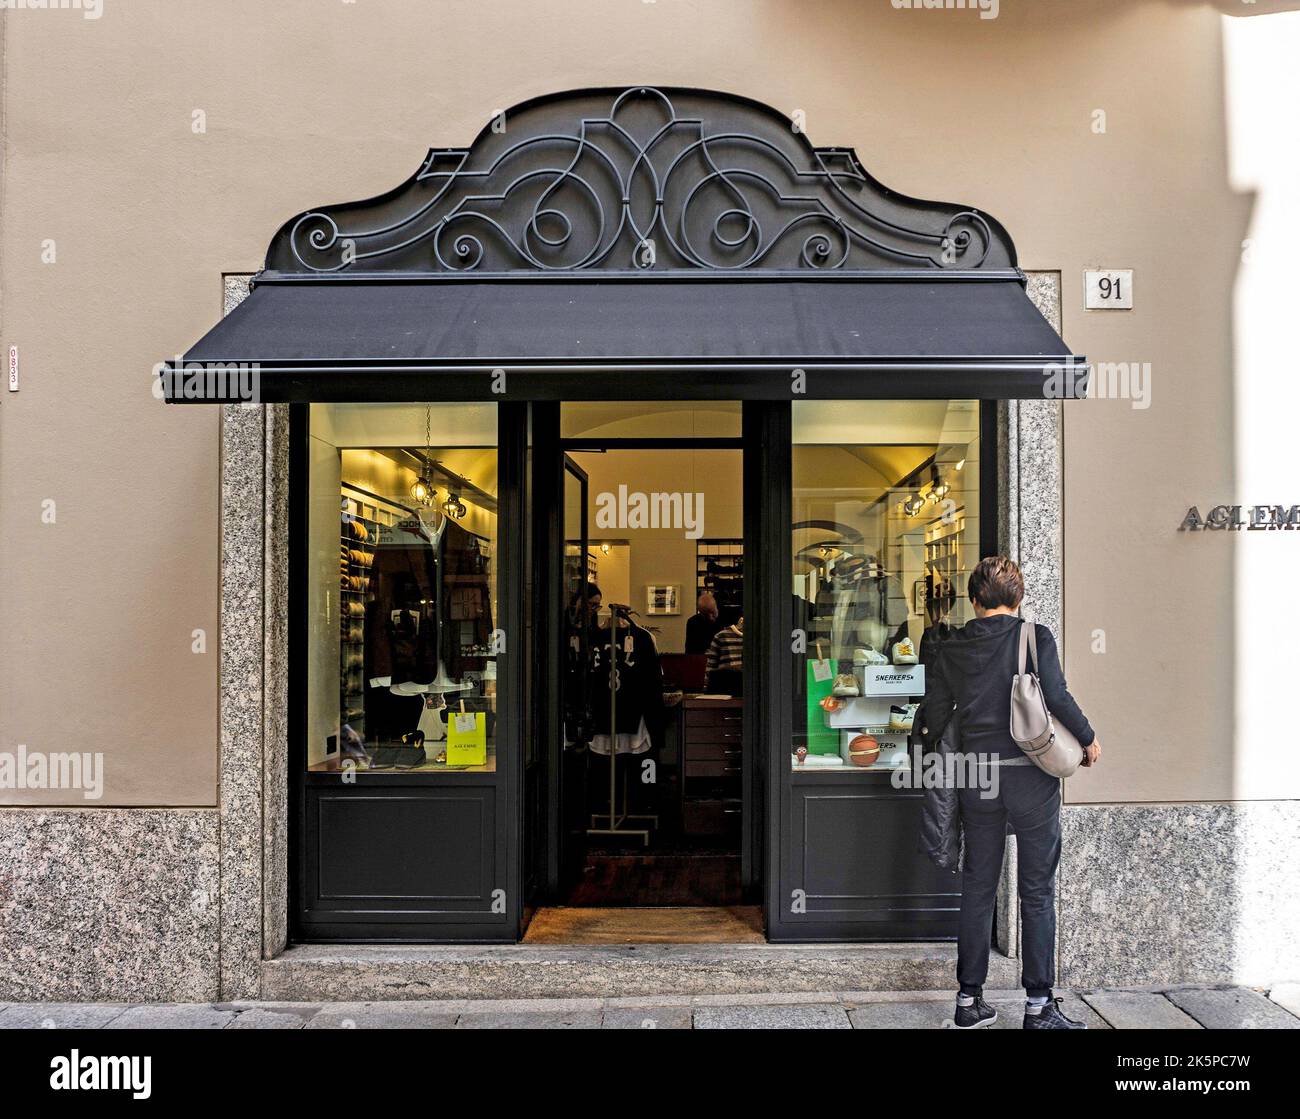 A.Gi. Emme shop, a footwear and clothing store in Como, Italy. Stock Photo